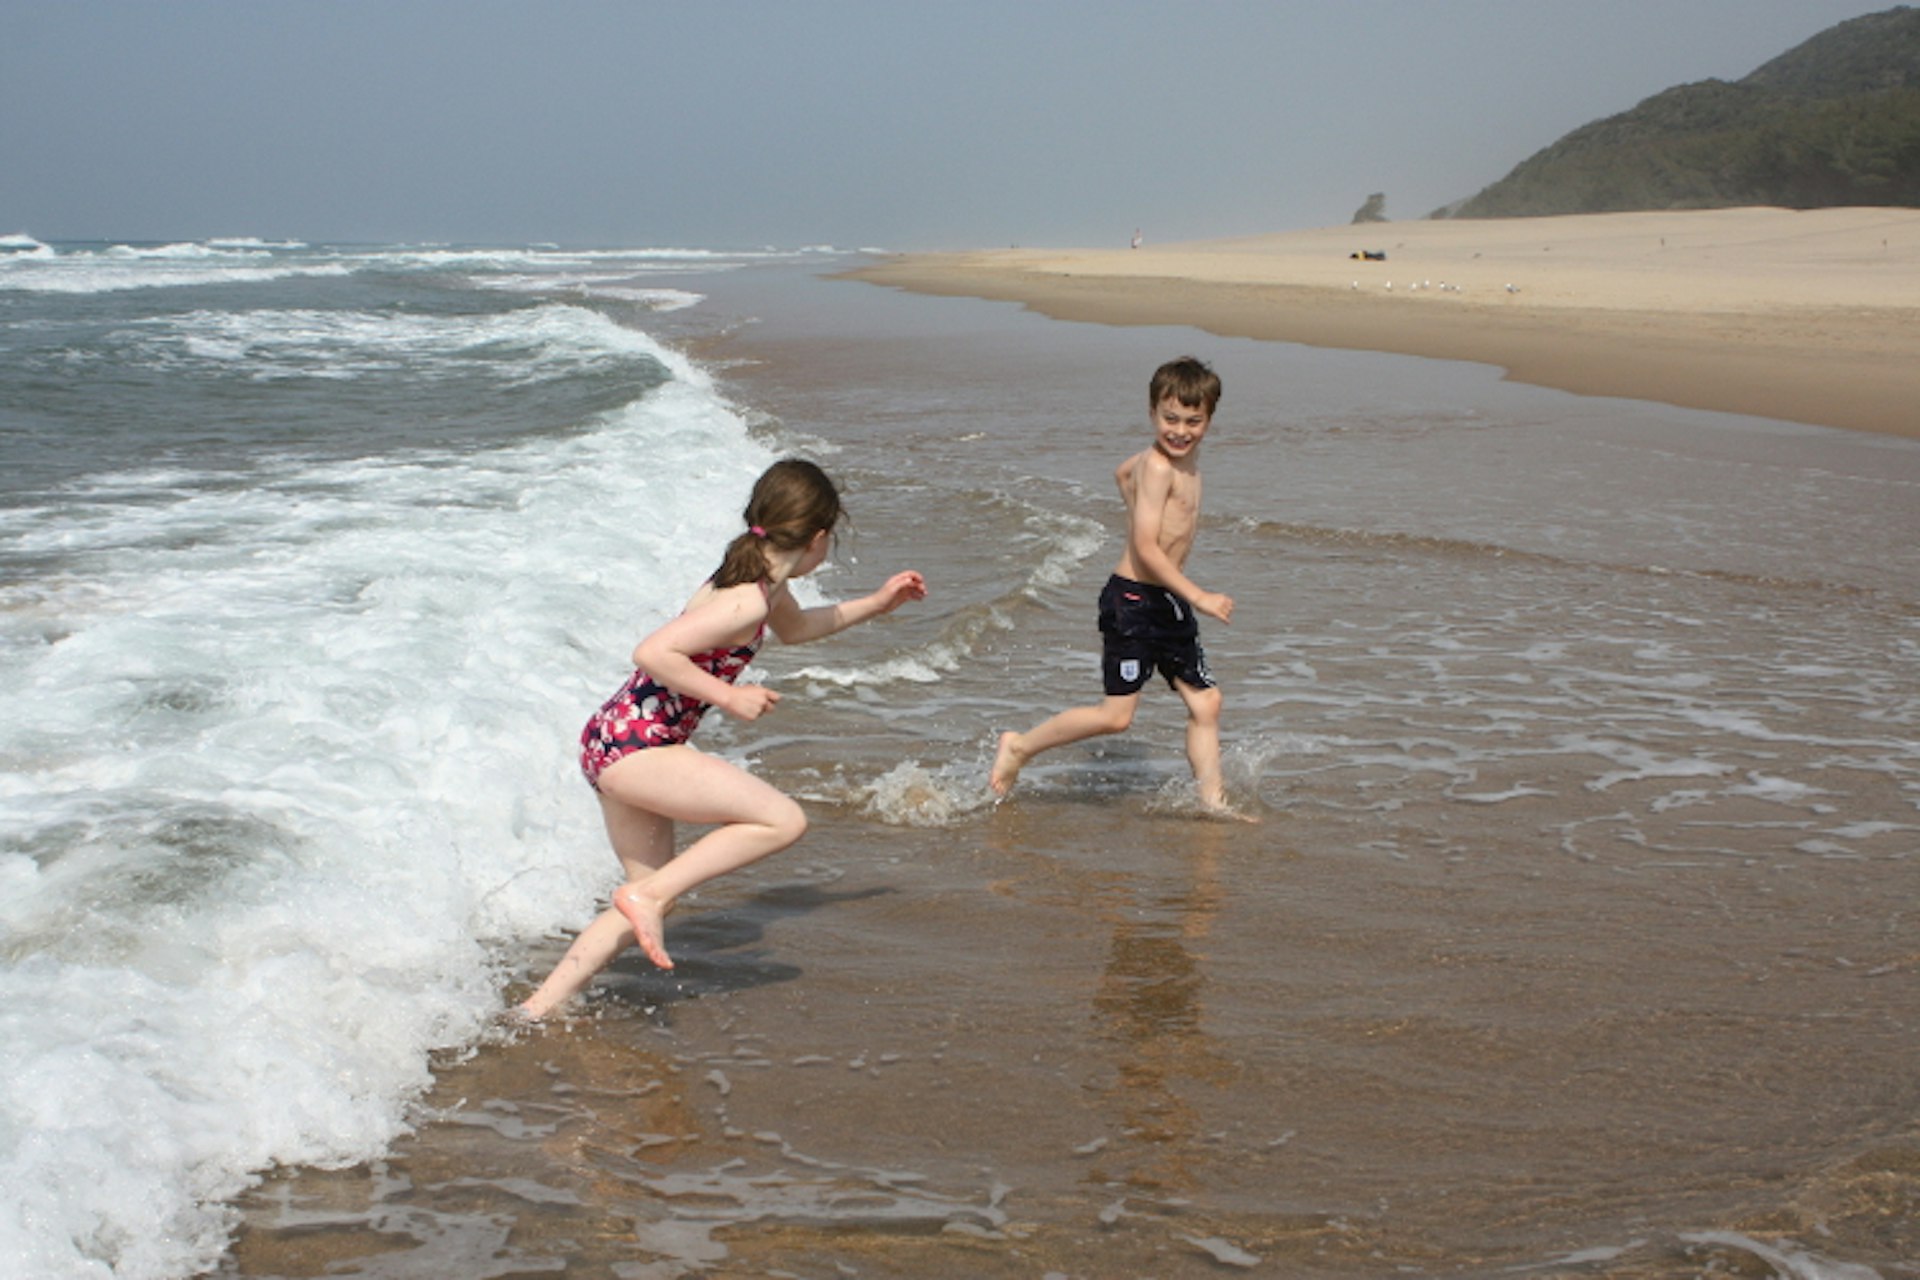 Playing in the surf at iSimangaliso Wetland Park, South Africa. Image by David Else / Lonely Planet